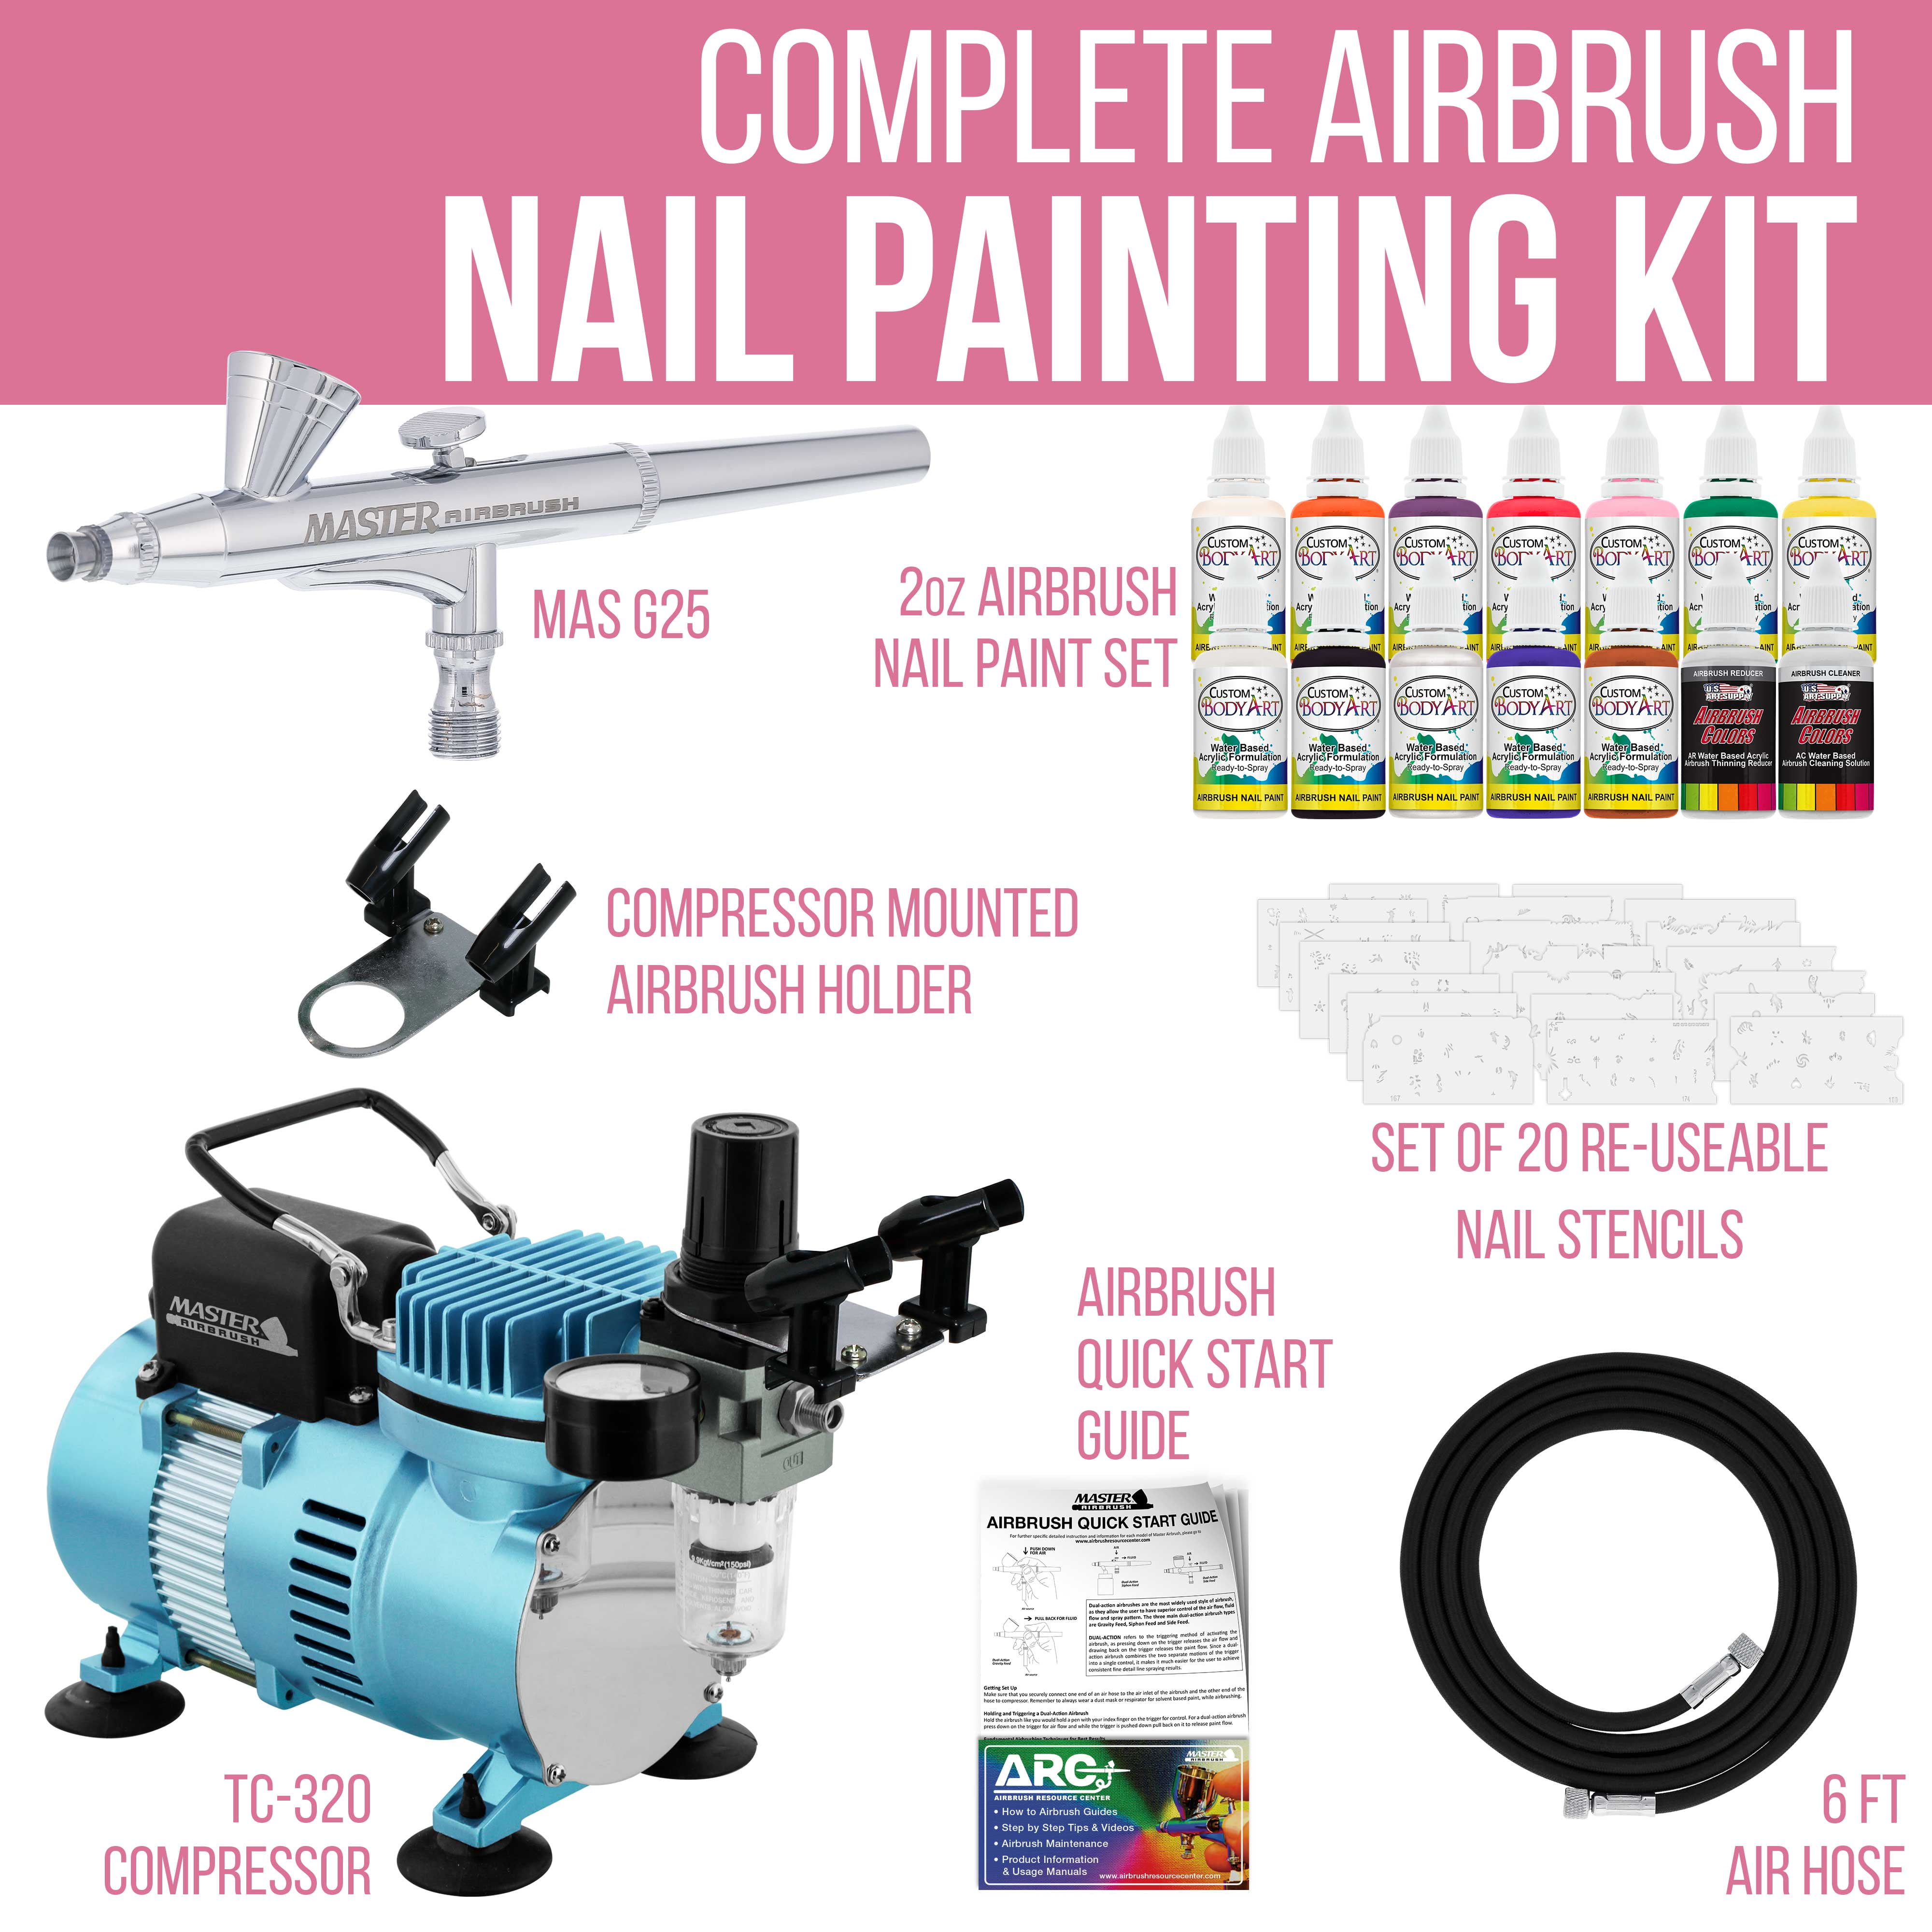  Master Airbrush Brand Finger Nail Decorating System. 2  Airbrushes, Air Compressor, Stencil Set of Over 100 Designs, 6' Hose,  Holder, 12-1oz Color Nail Paint Kit, Cleaner, & (Free) How to Airbrush